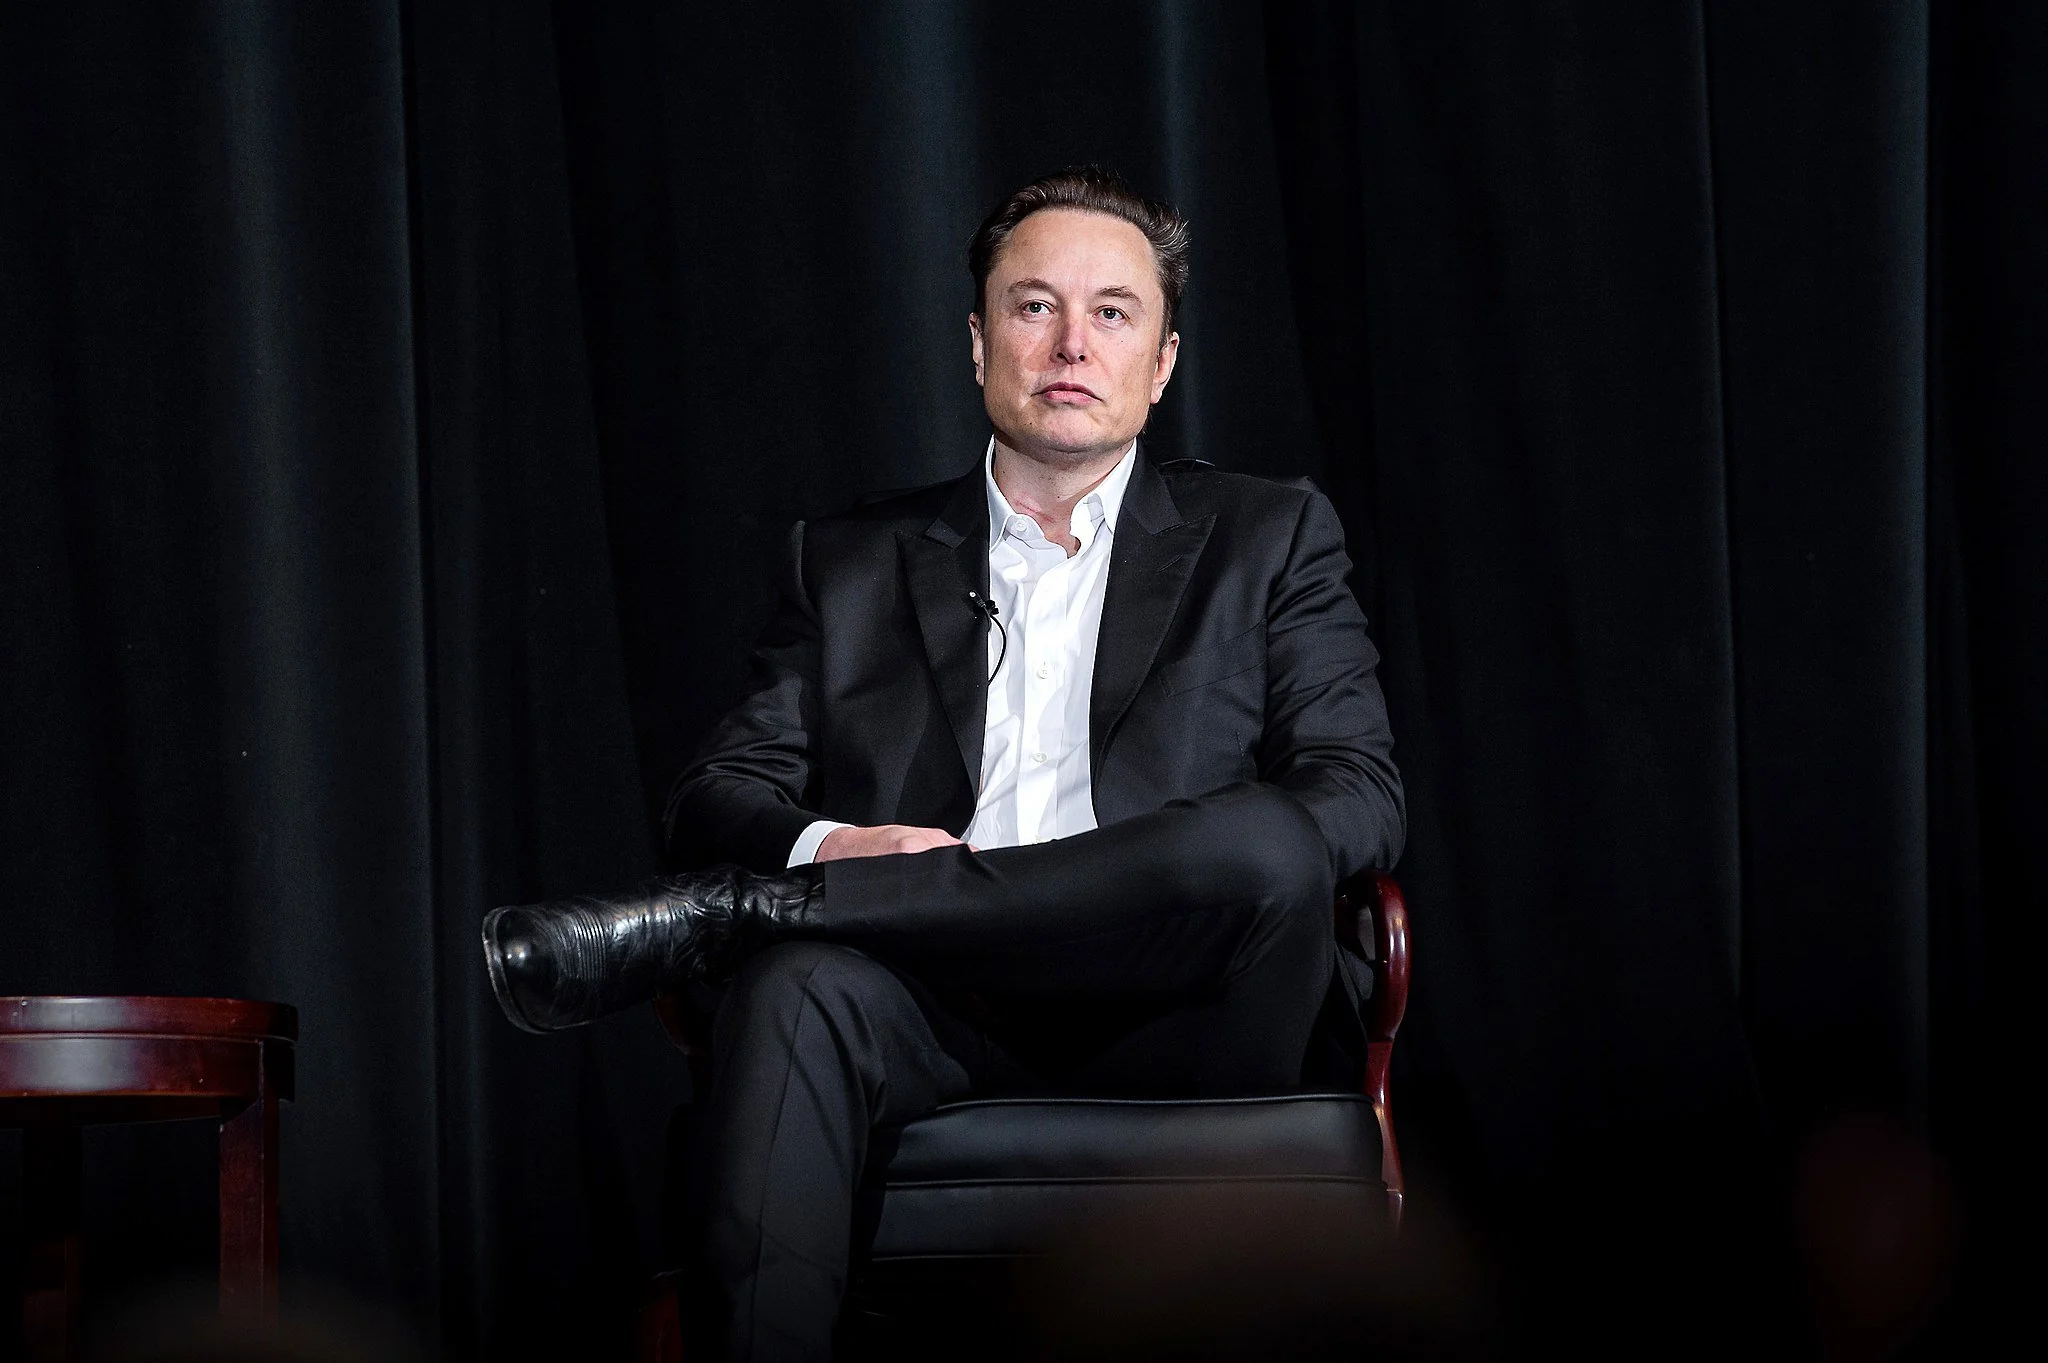 Elon Musk Predicts a Jobless Future: Will Robots Make Us Rich but Unhappy?